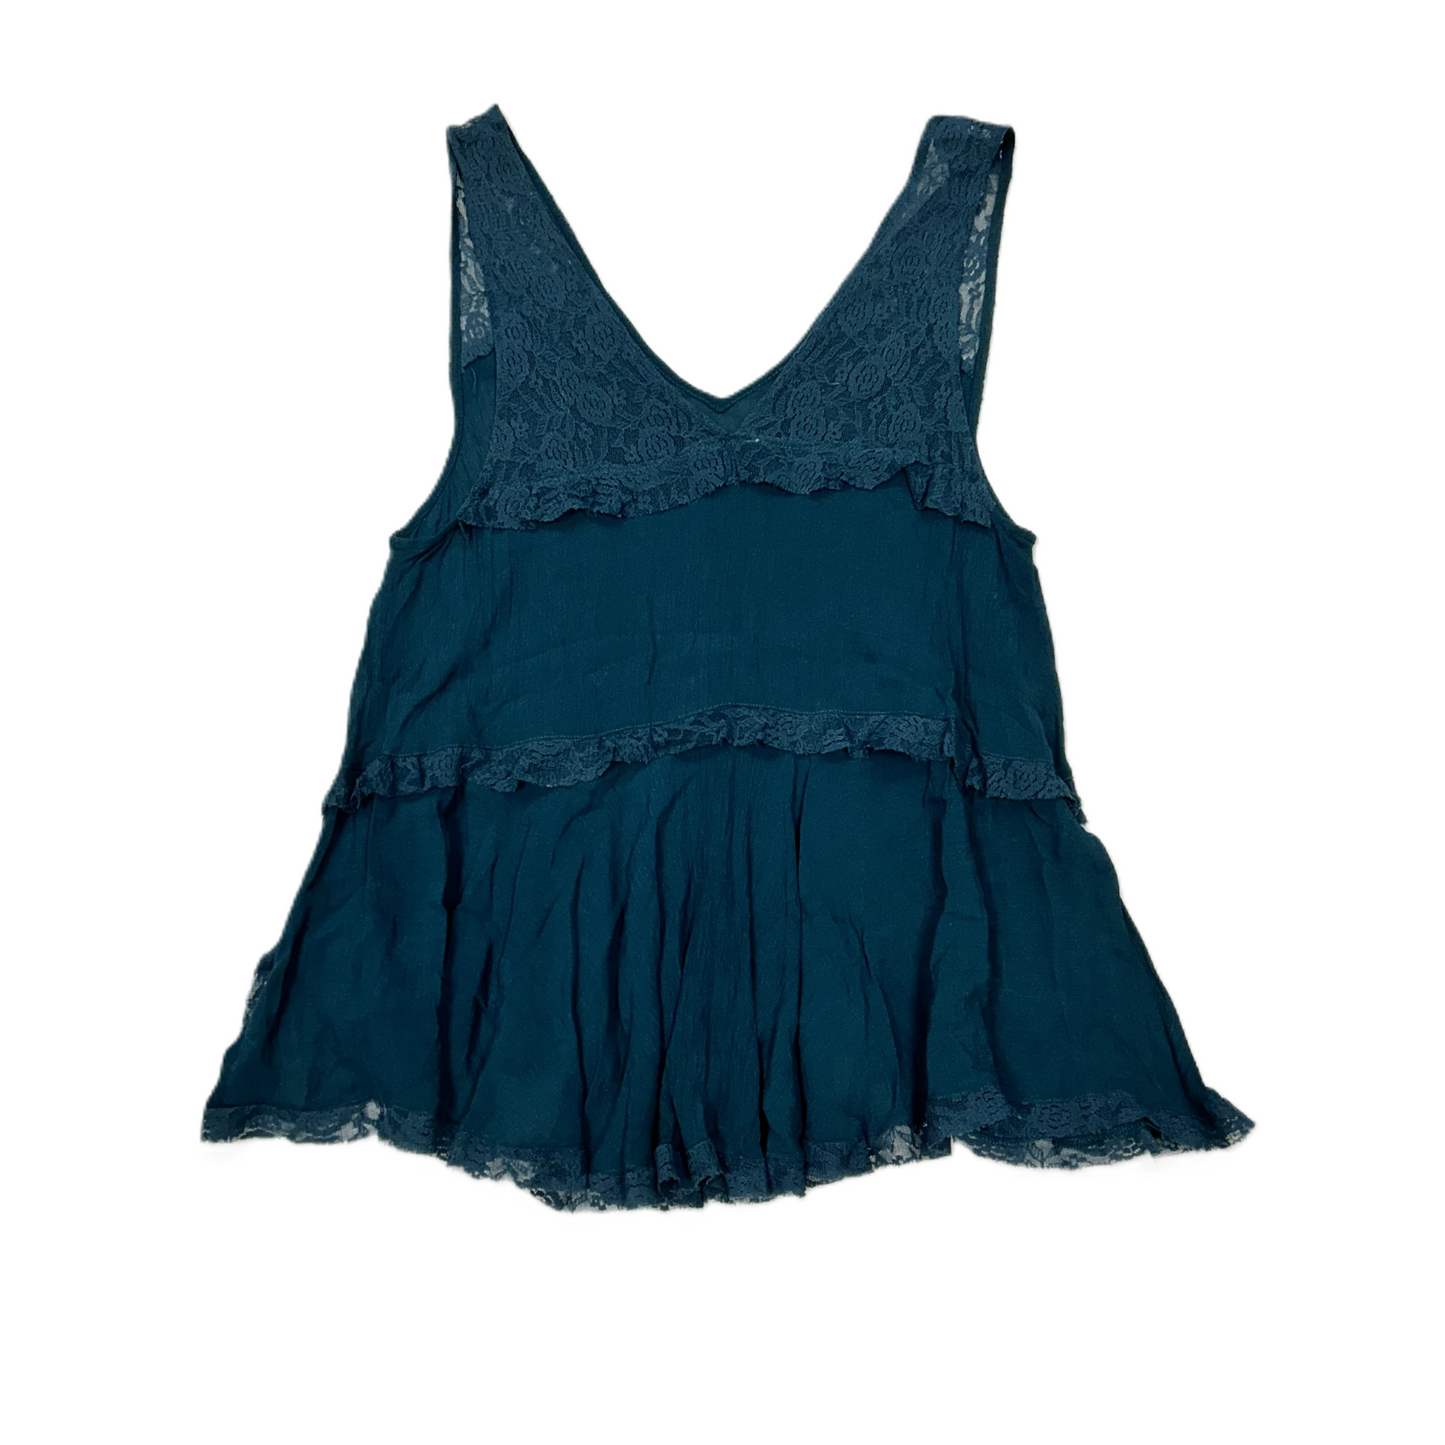 Teal Top Sleeveless By Free People, Size: S